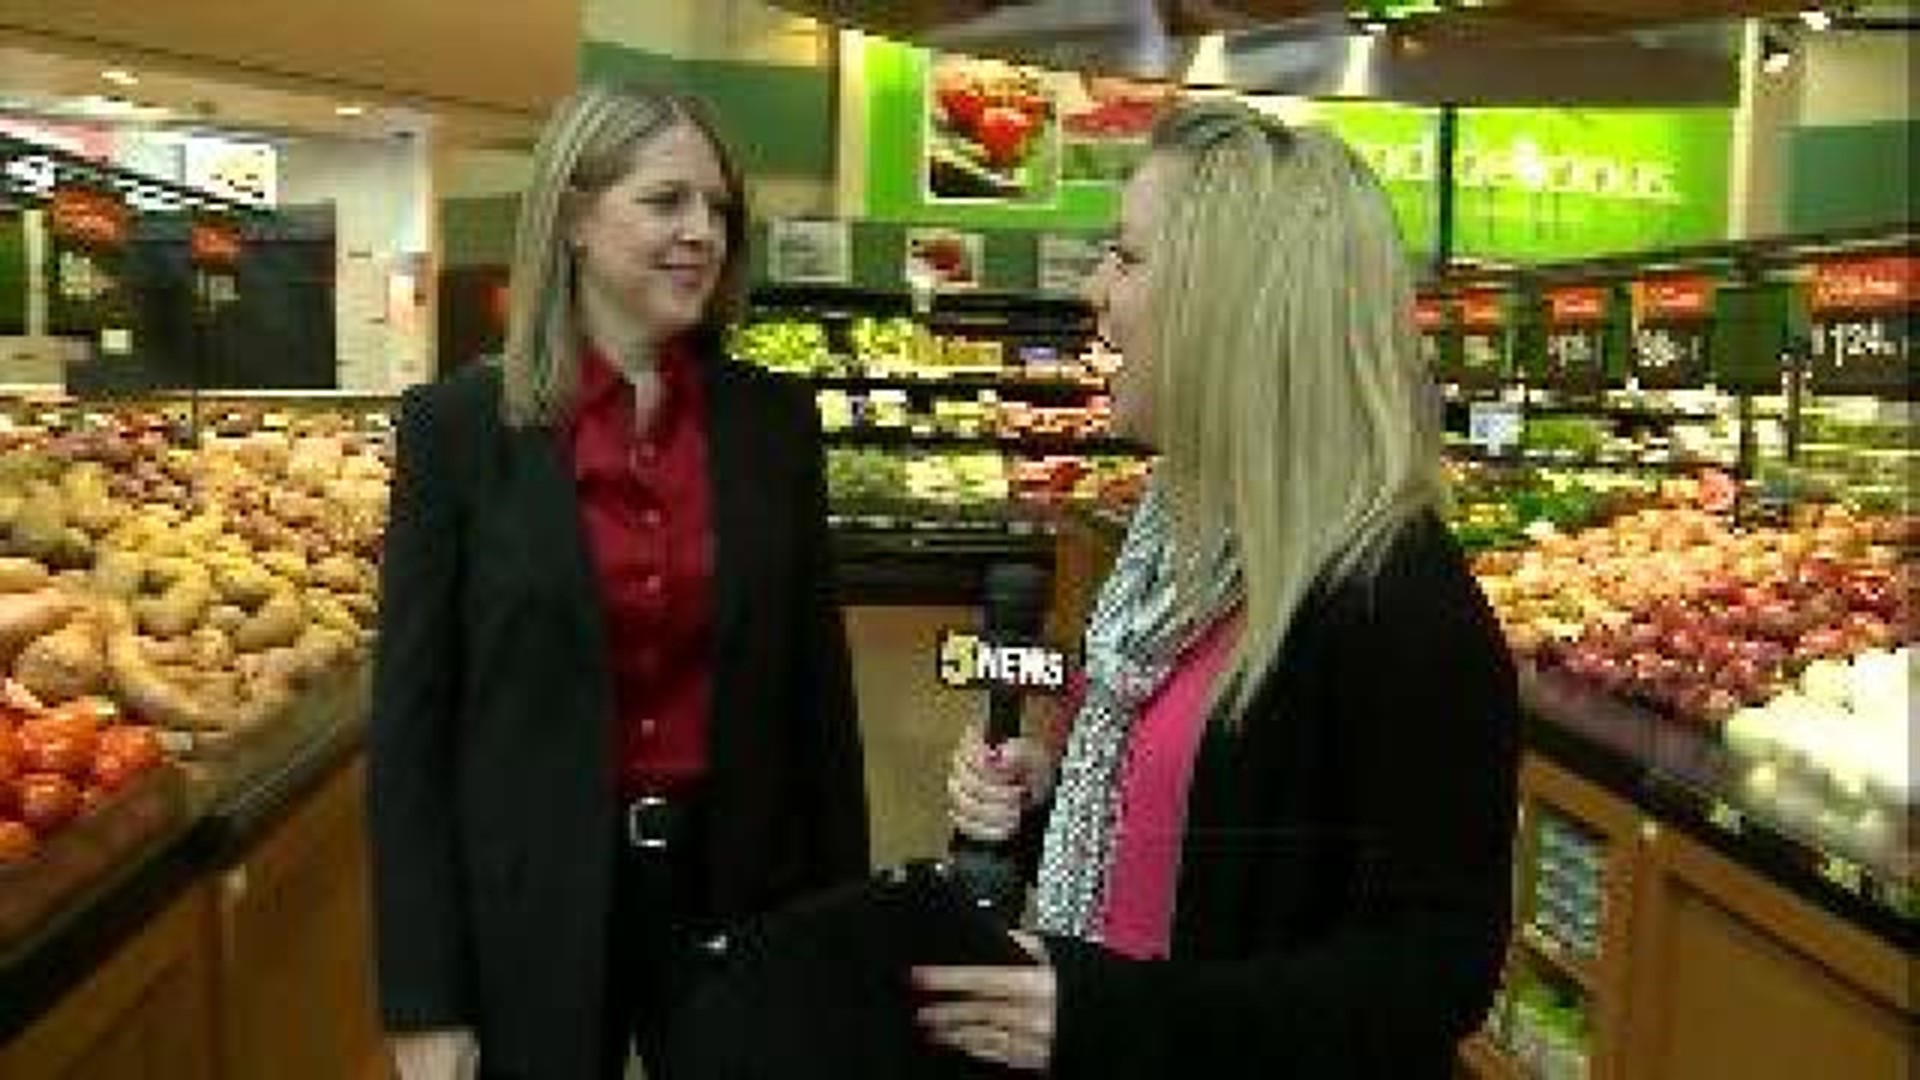 Walmart Discusses Ways to Improve Nutrition